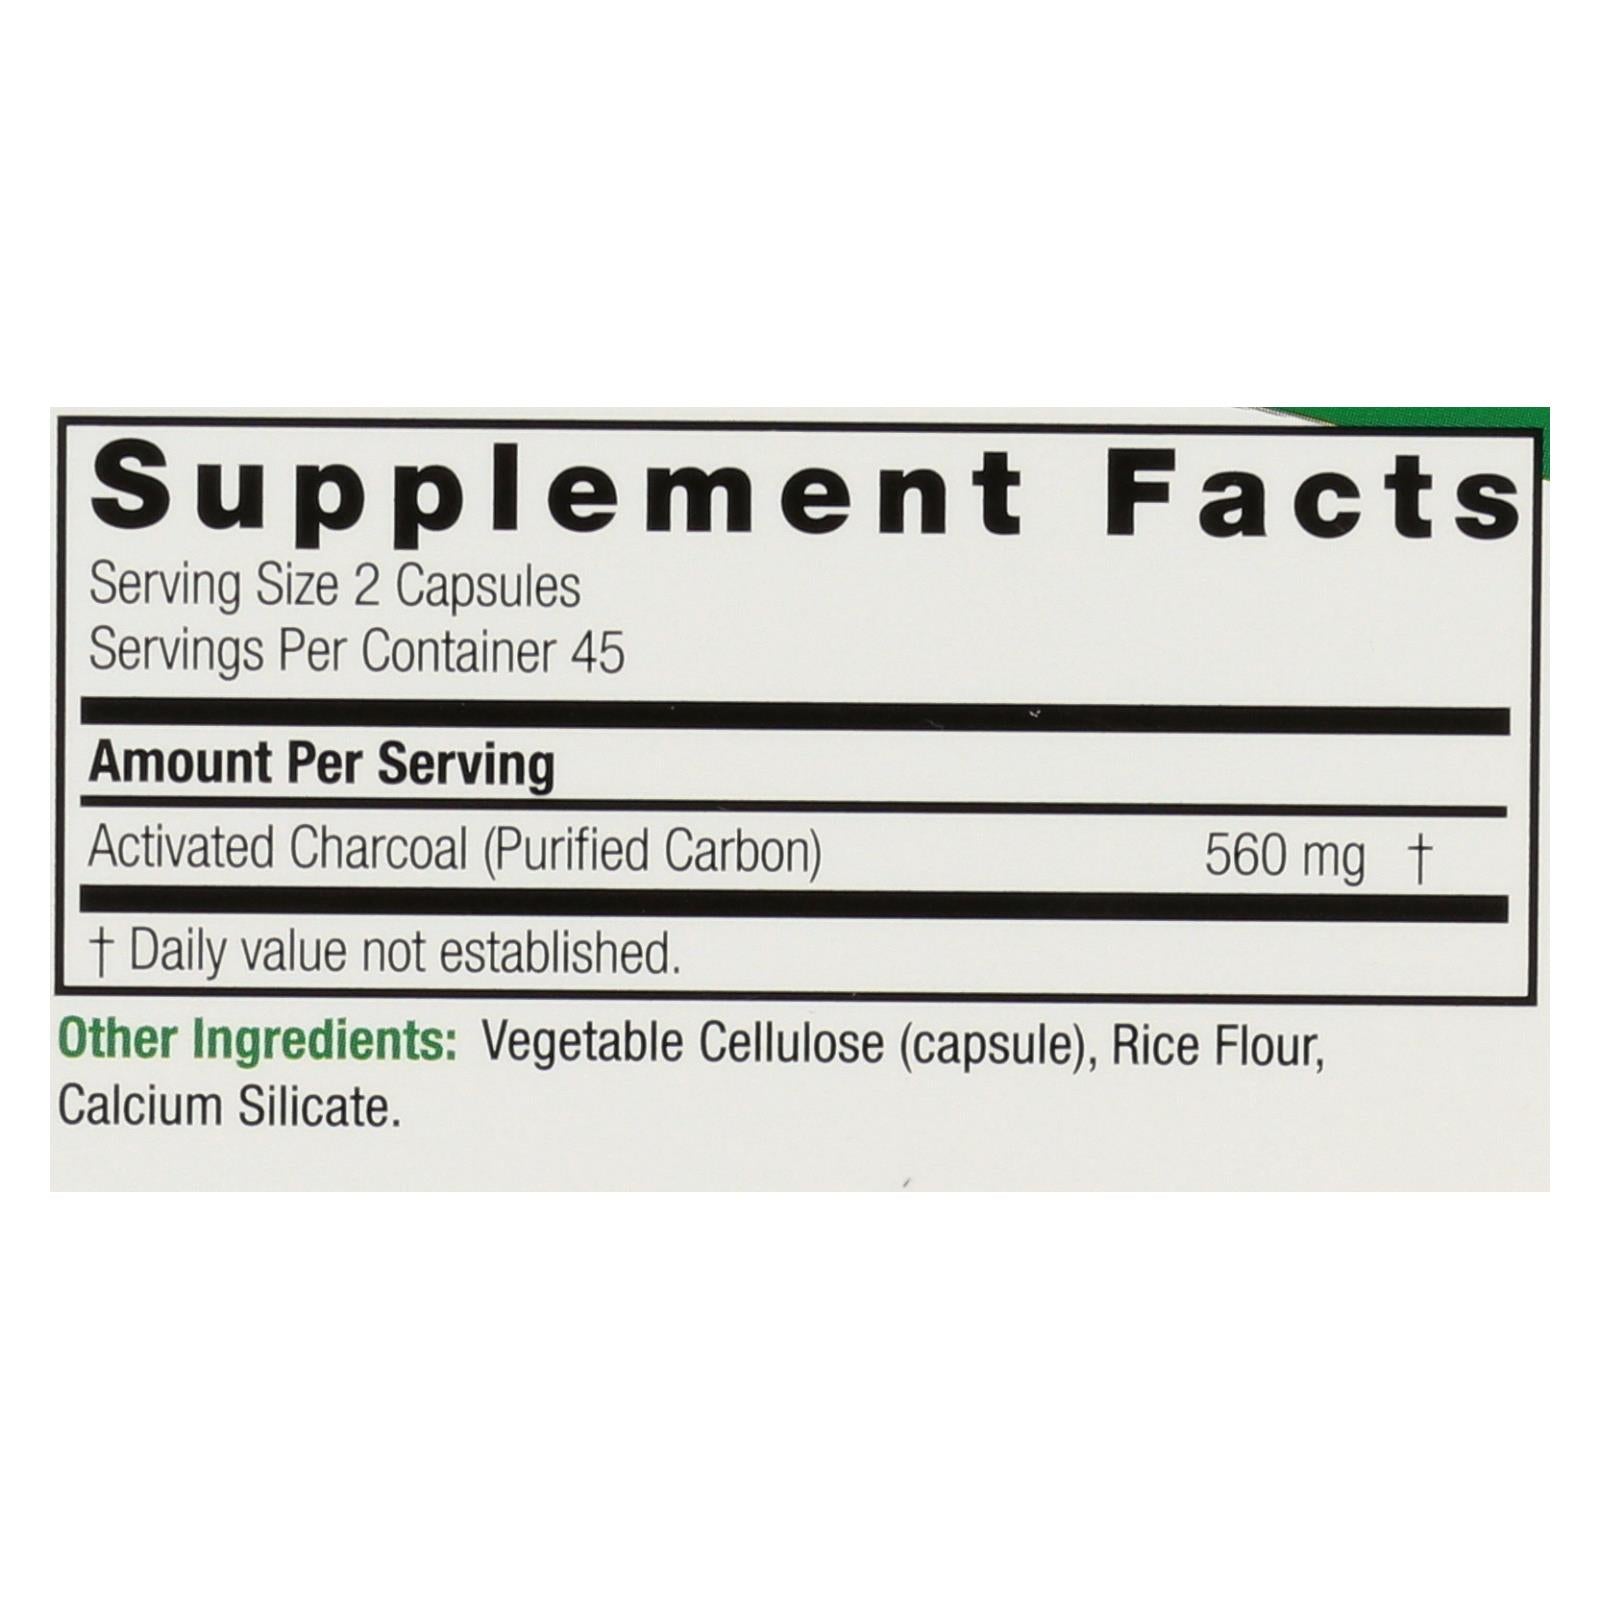 Nature's Answer - Charcoal - Activated Purified - 90 Softgels